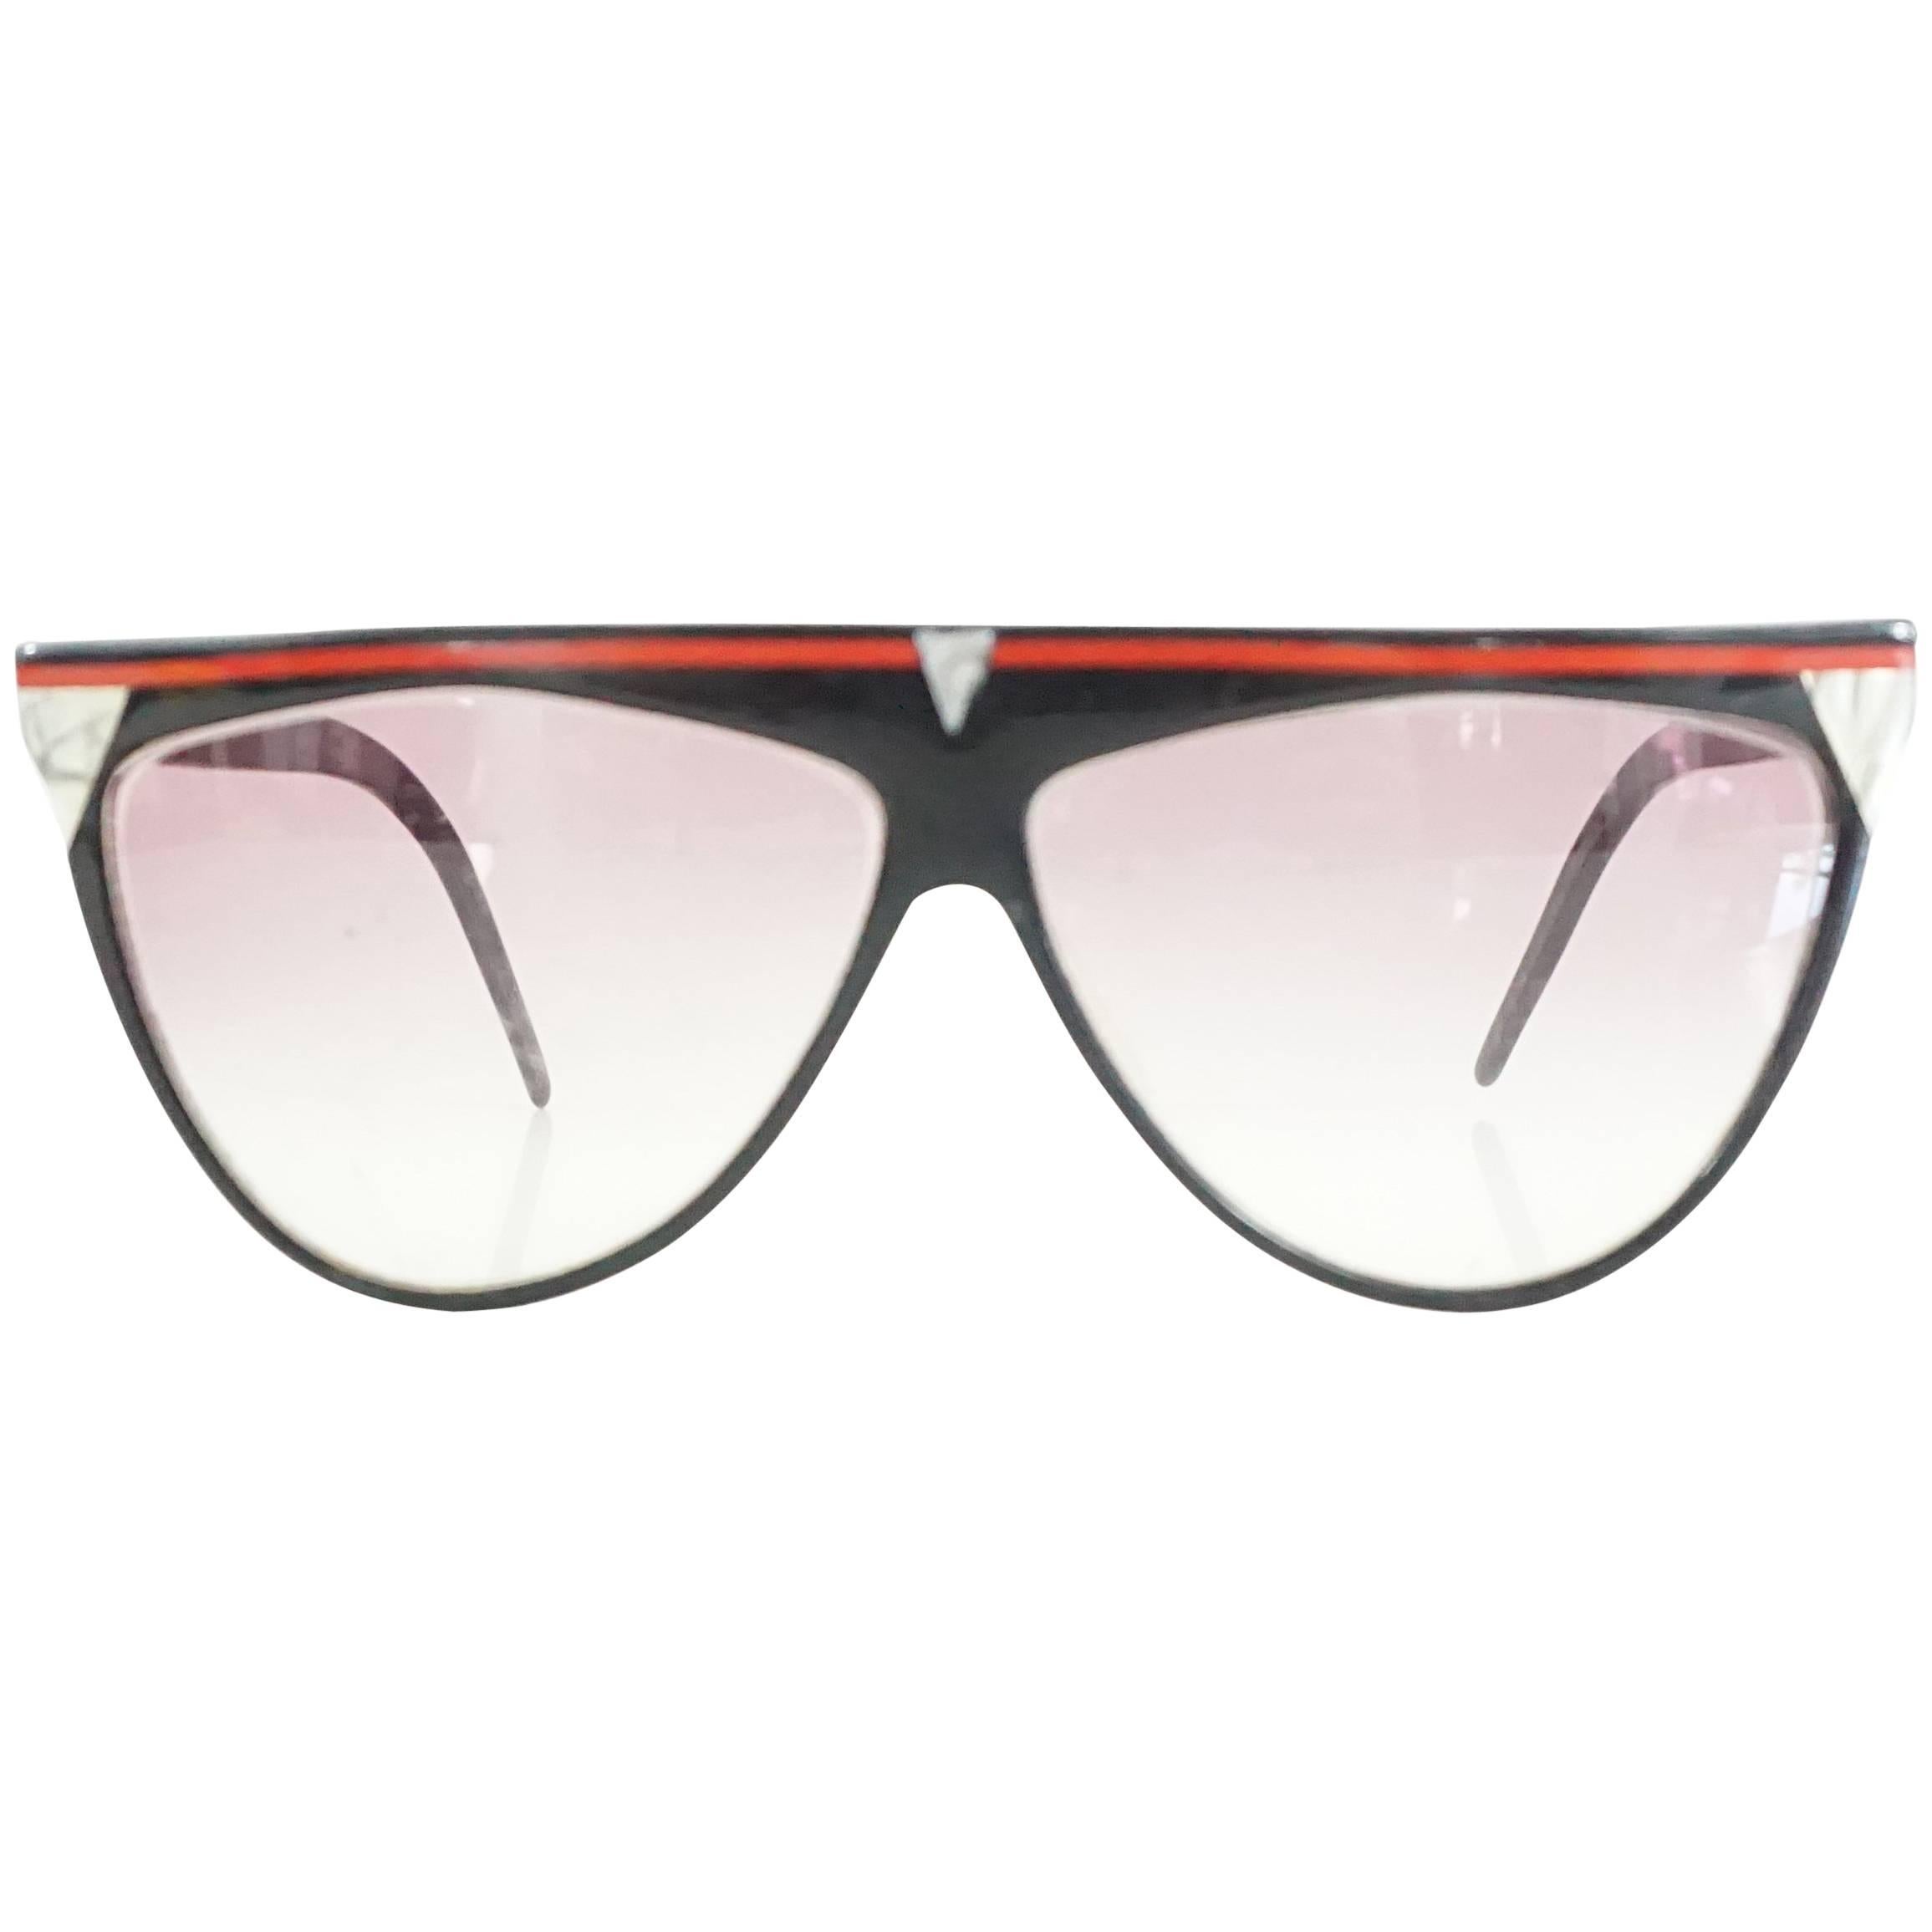 Laura Biagiotti Black Sunglasses with Red Detailing